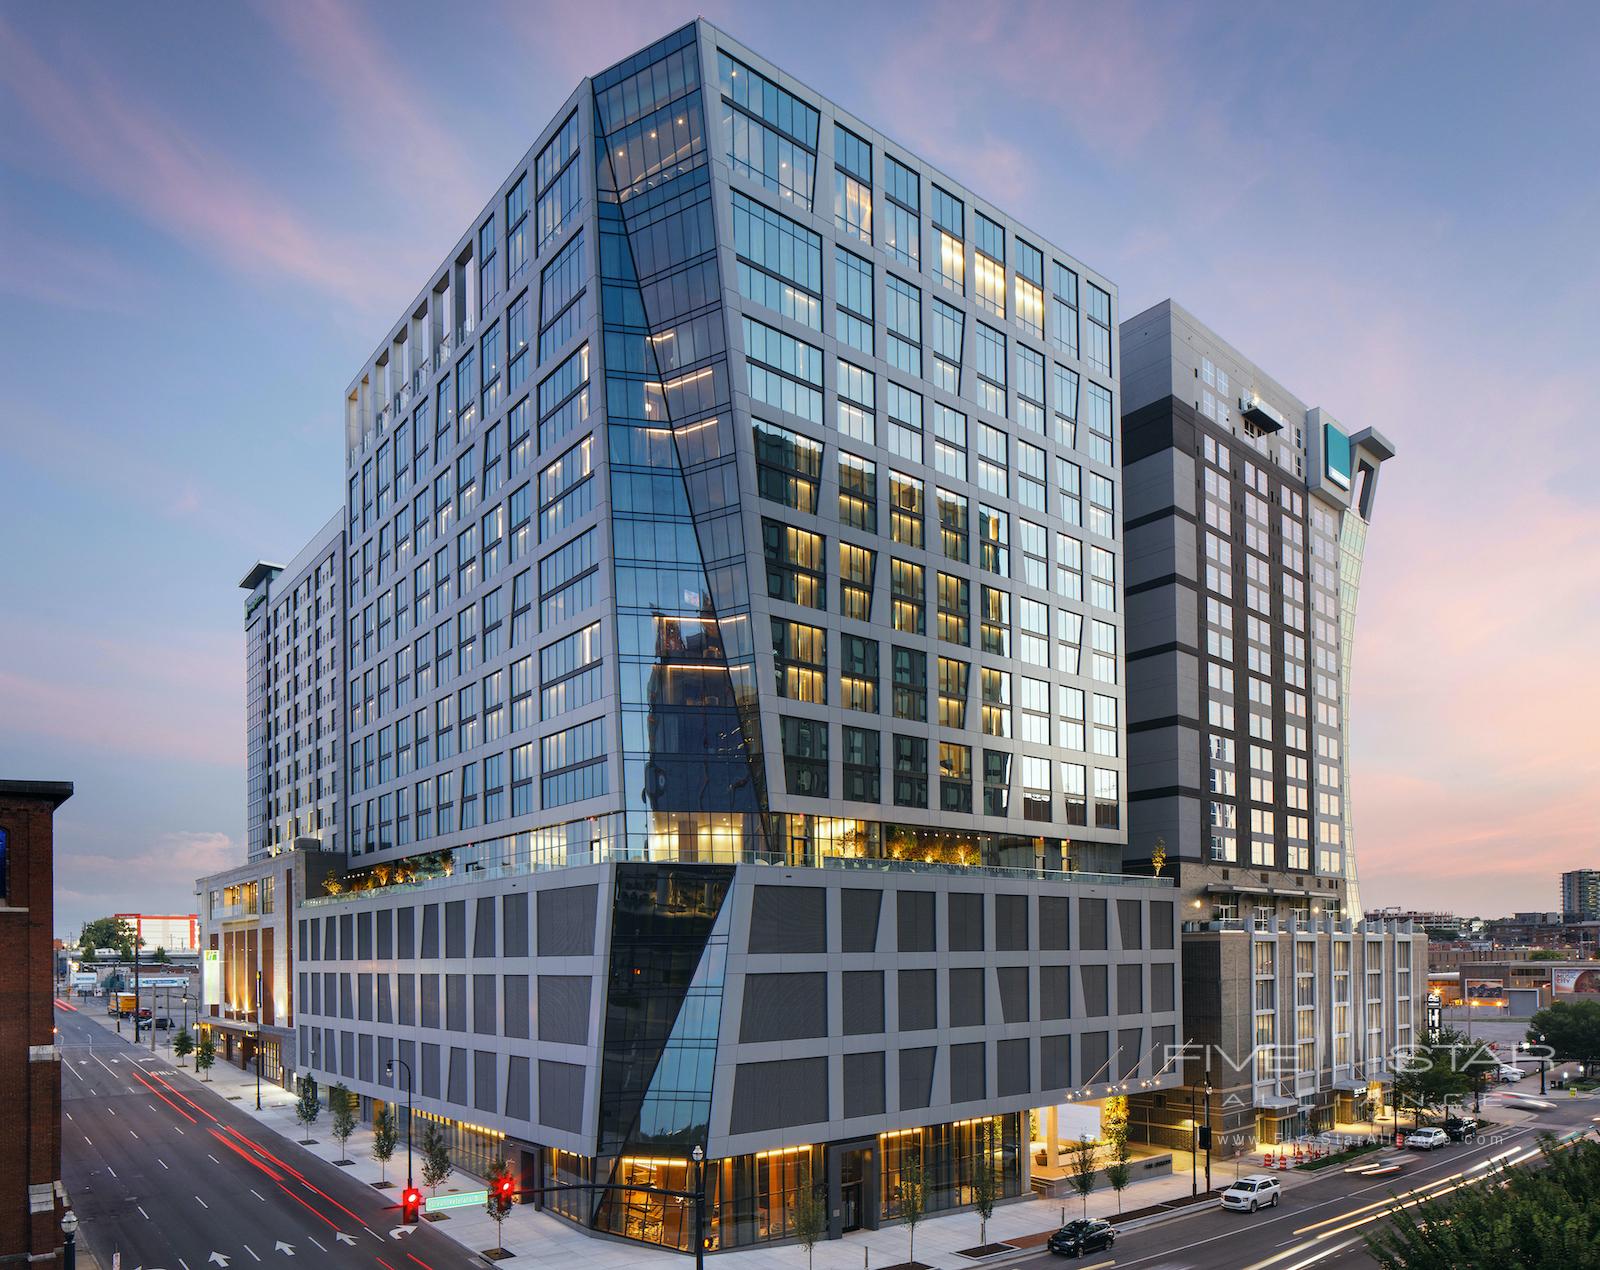 The Joseph Hotel in Nashville, designed by Arquitectonica, is located in the vibrant SoBro district and features 21 floors and 297 guest rooms and suites.